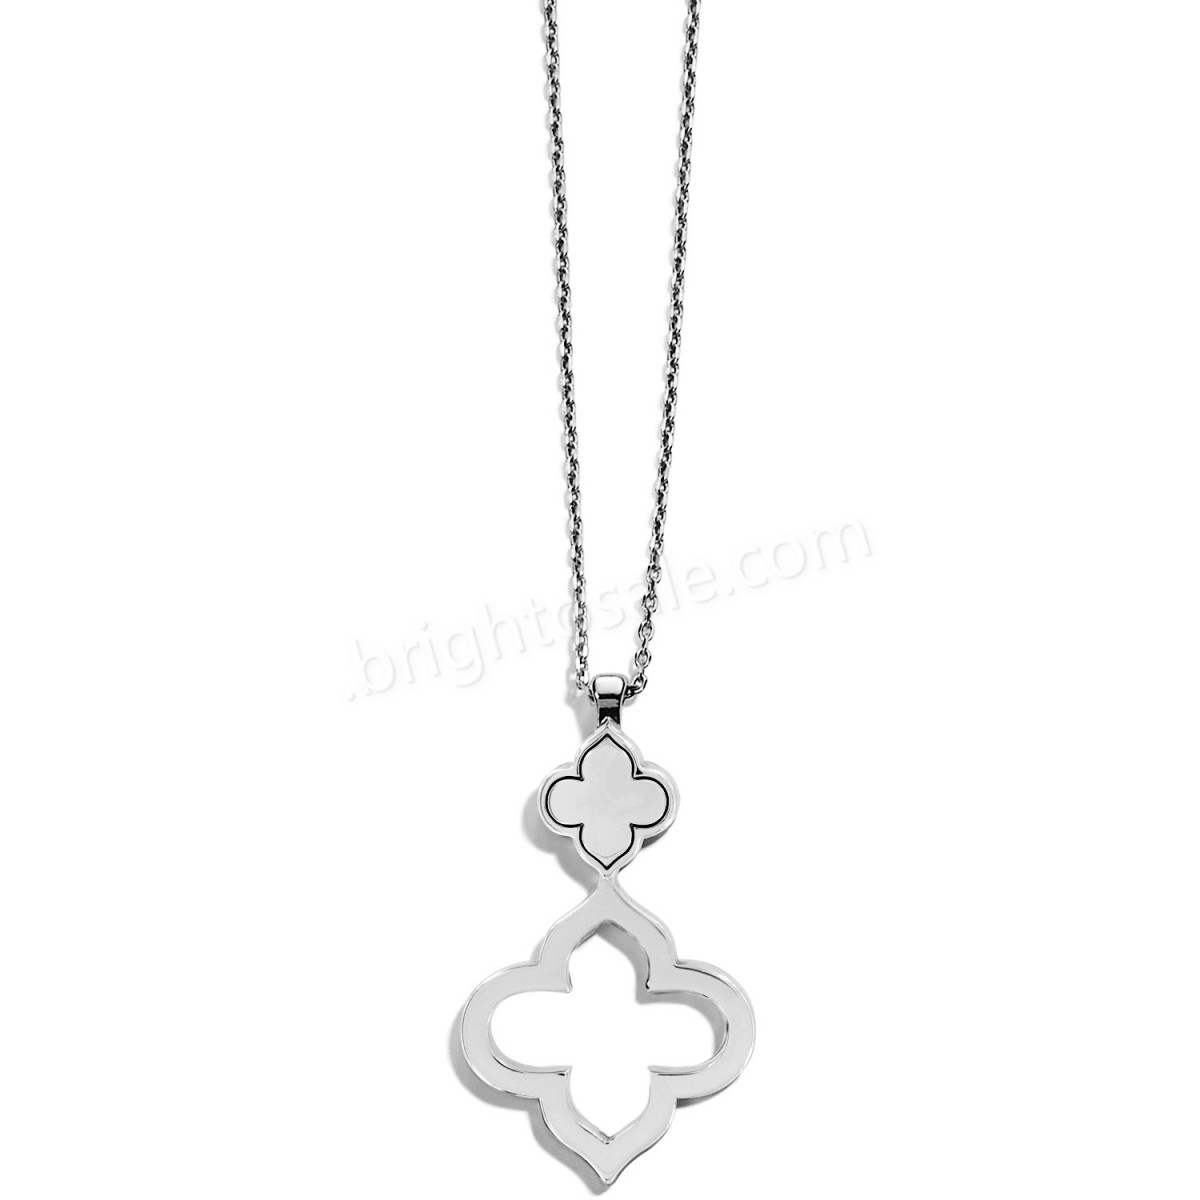 Brighton Collectibles & Online Discount The Way Cross Necklace - -1